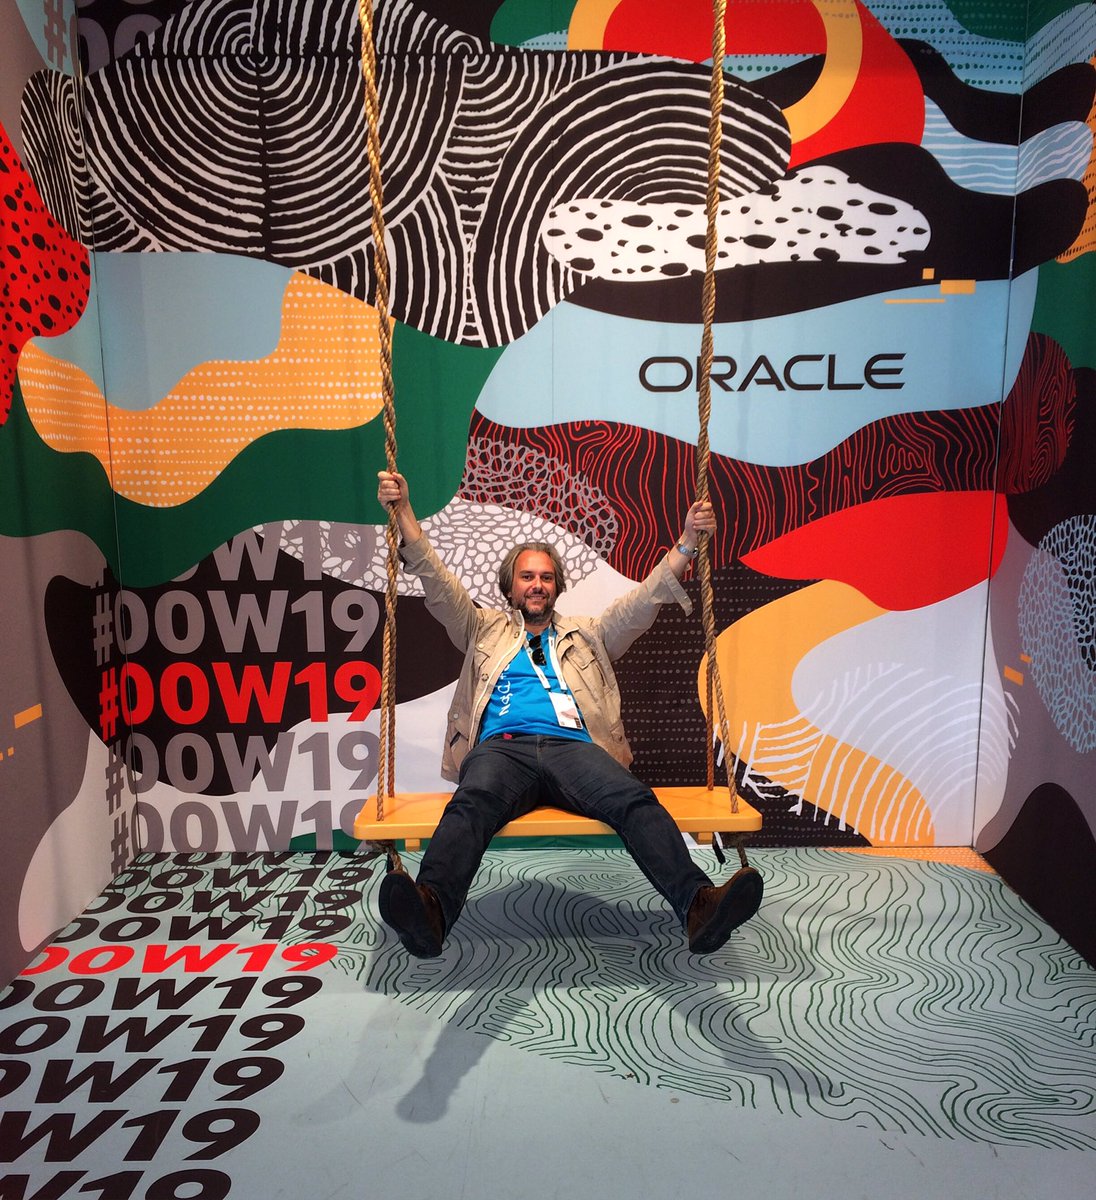 Let’s close this amazing edition of #OOW19 like this! #oracle #mysql #mysql8isgreat #sanfrancisco